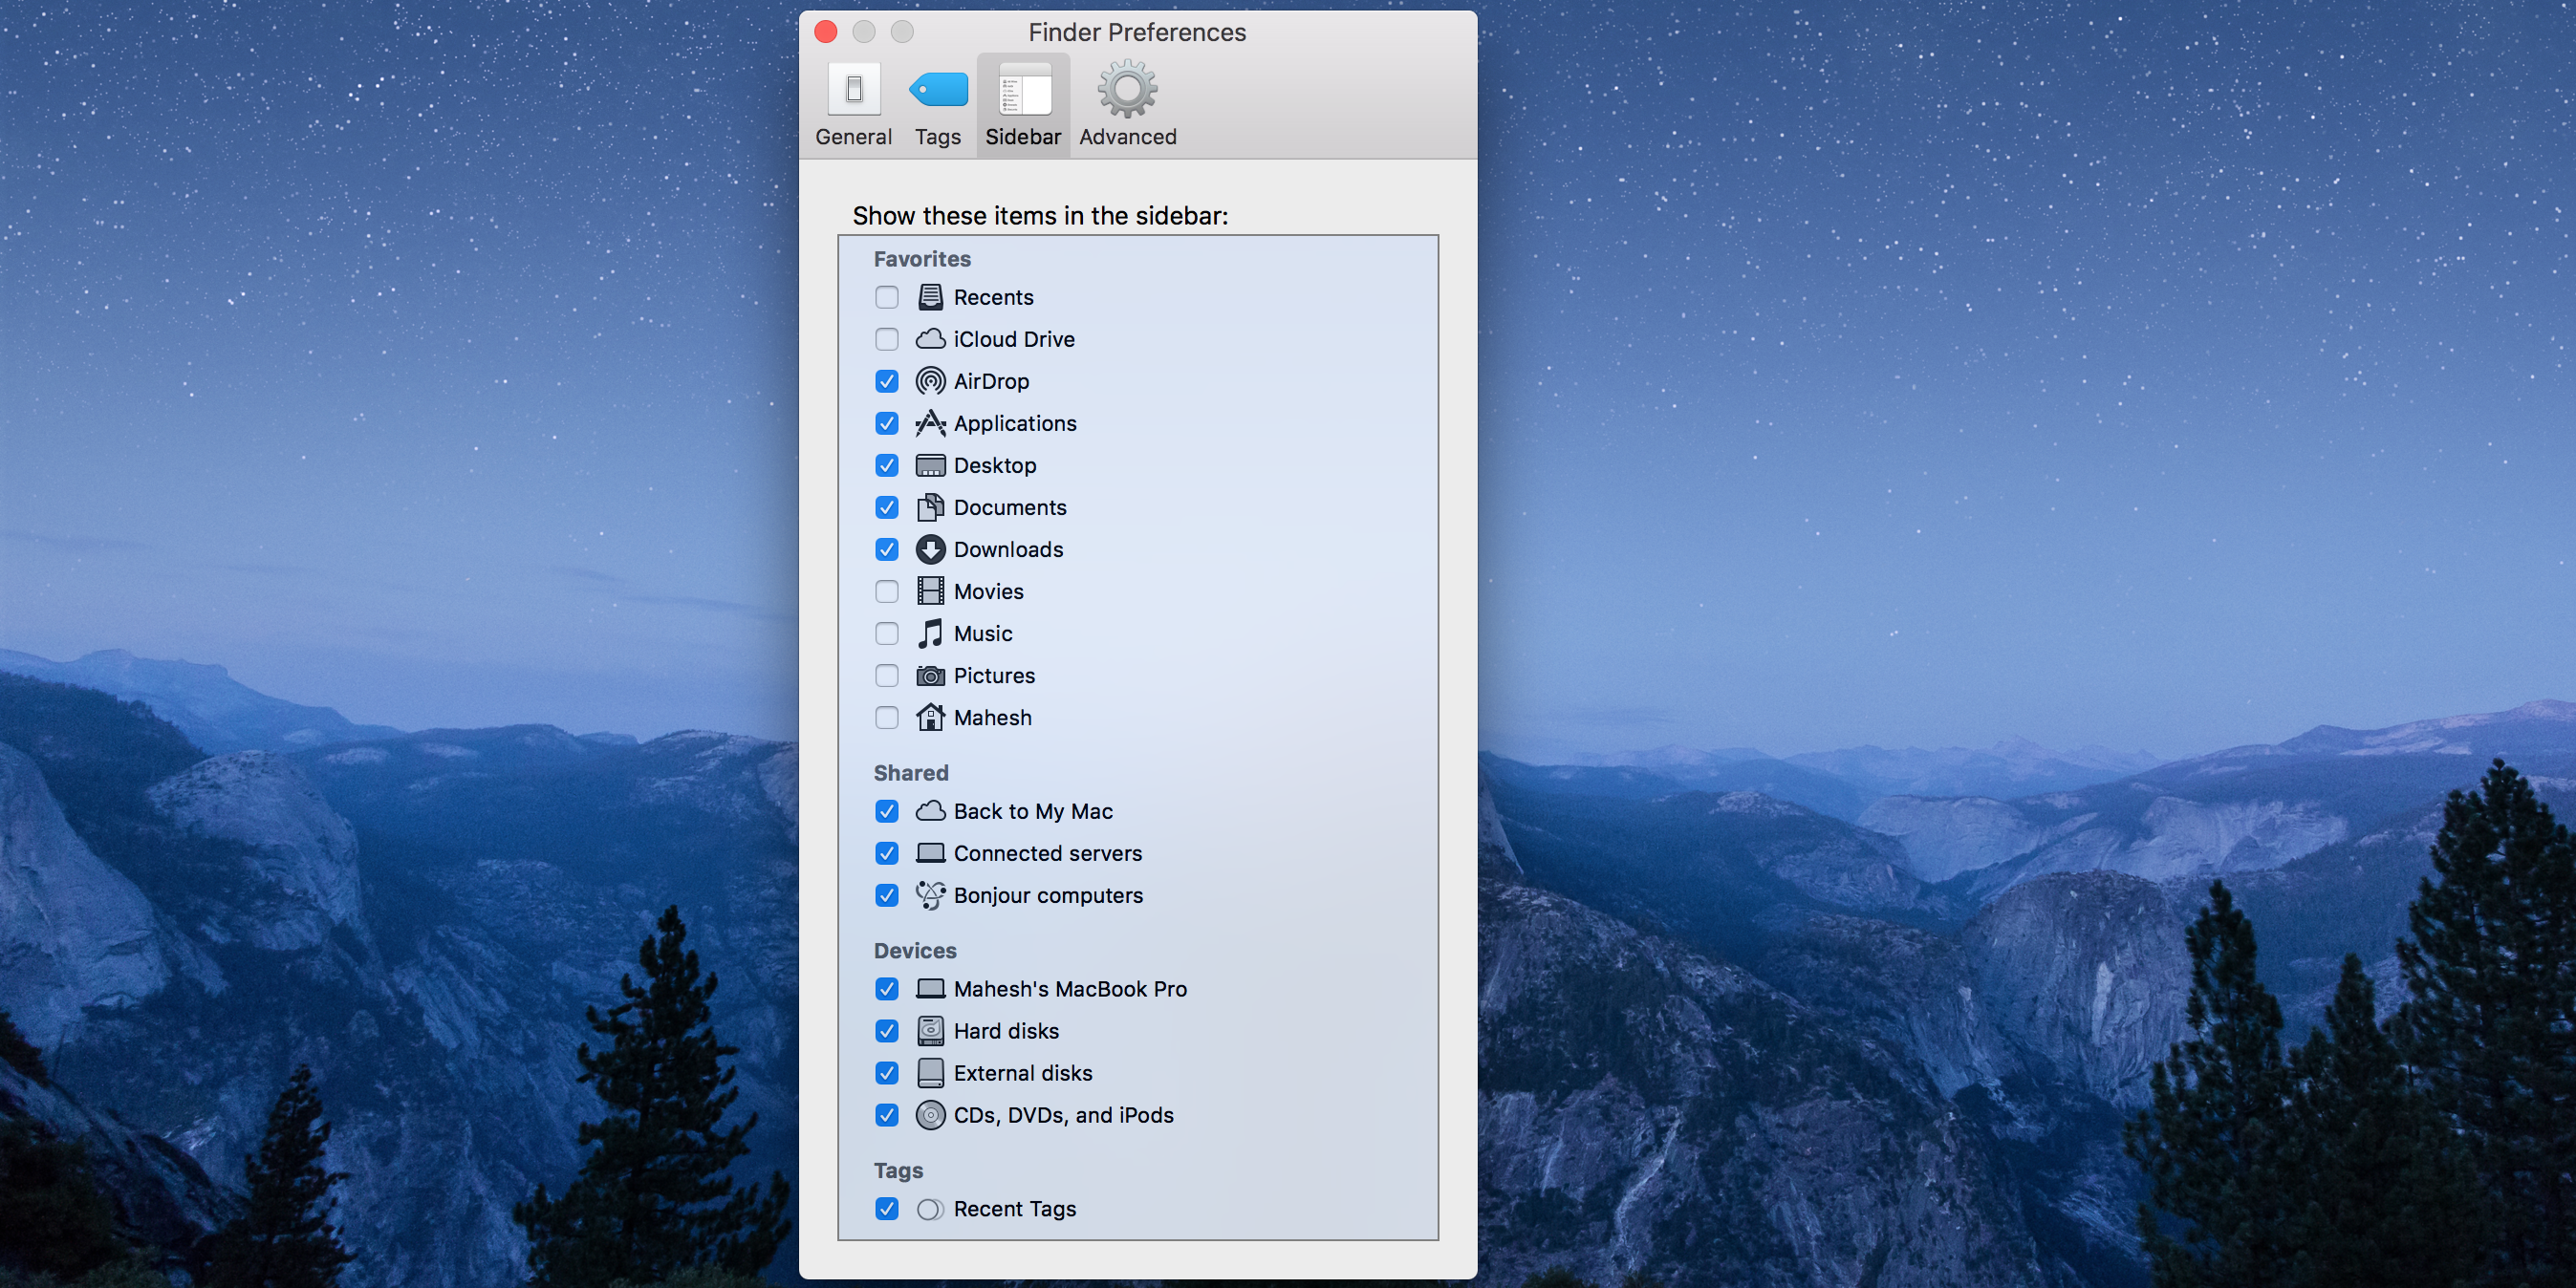 Customize the Sidebar in Finder